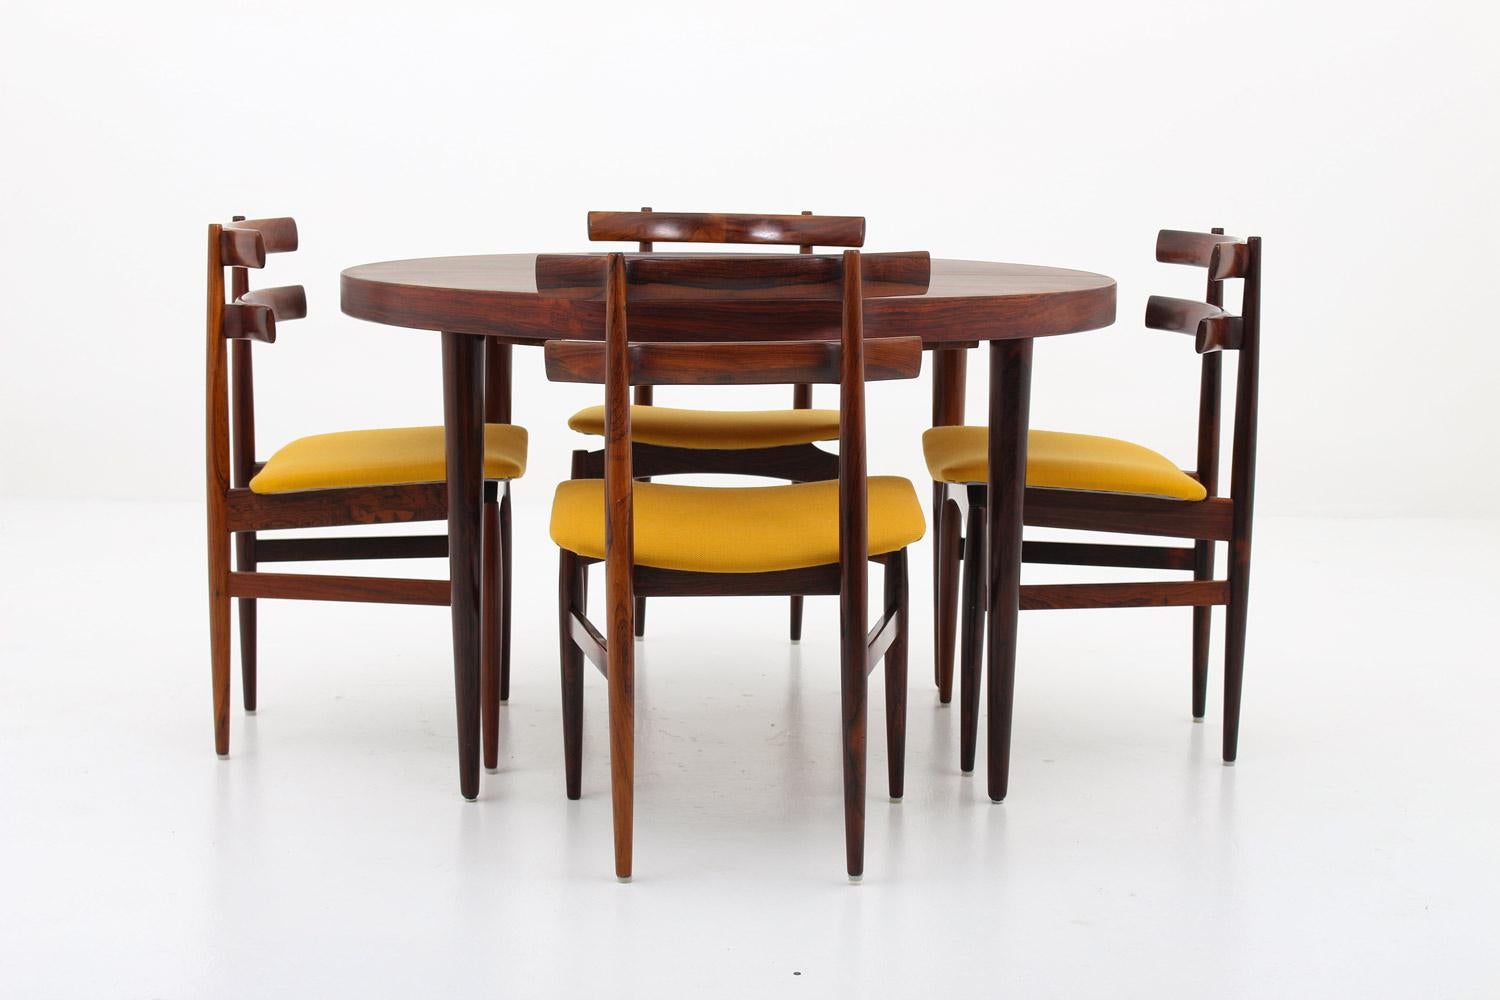 A stunning dining room set No. 30 by Poul Hundevad, Denmark. 
The chairs are made of solid rosewood. The backrests are beautifully curved and look like they have been melted together with the legs that are holding them. The front legs are cut off a